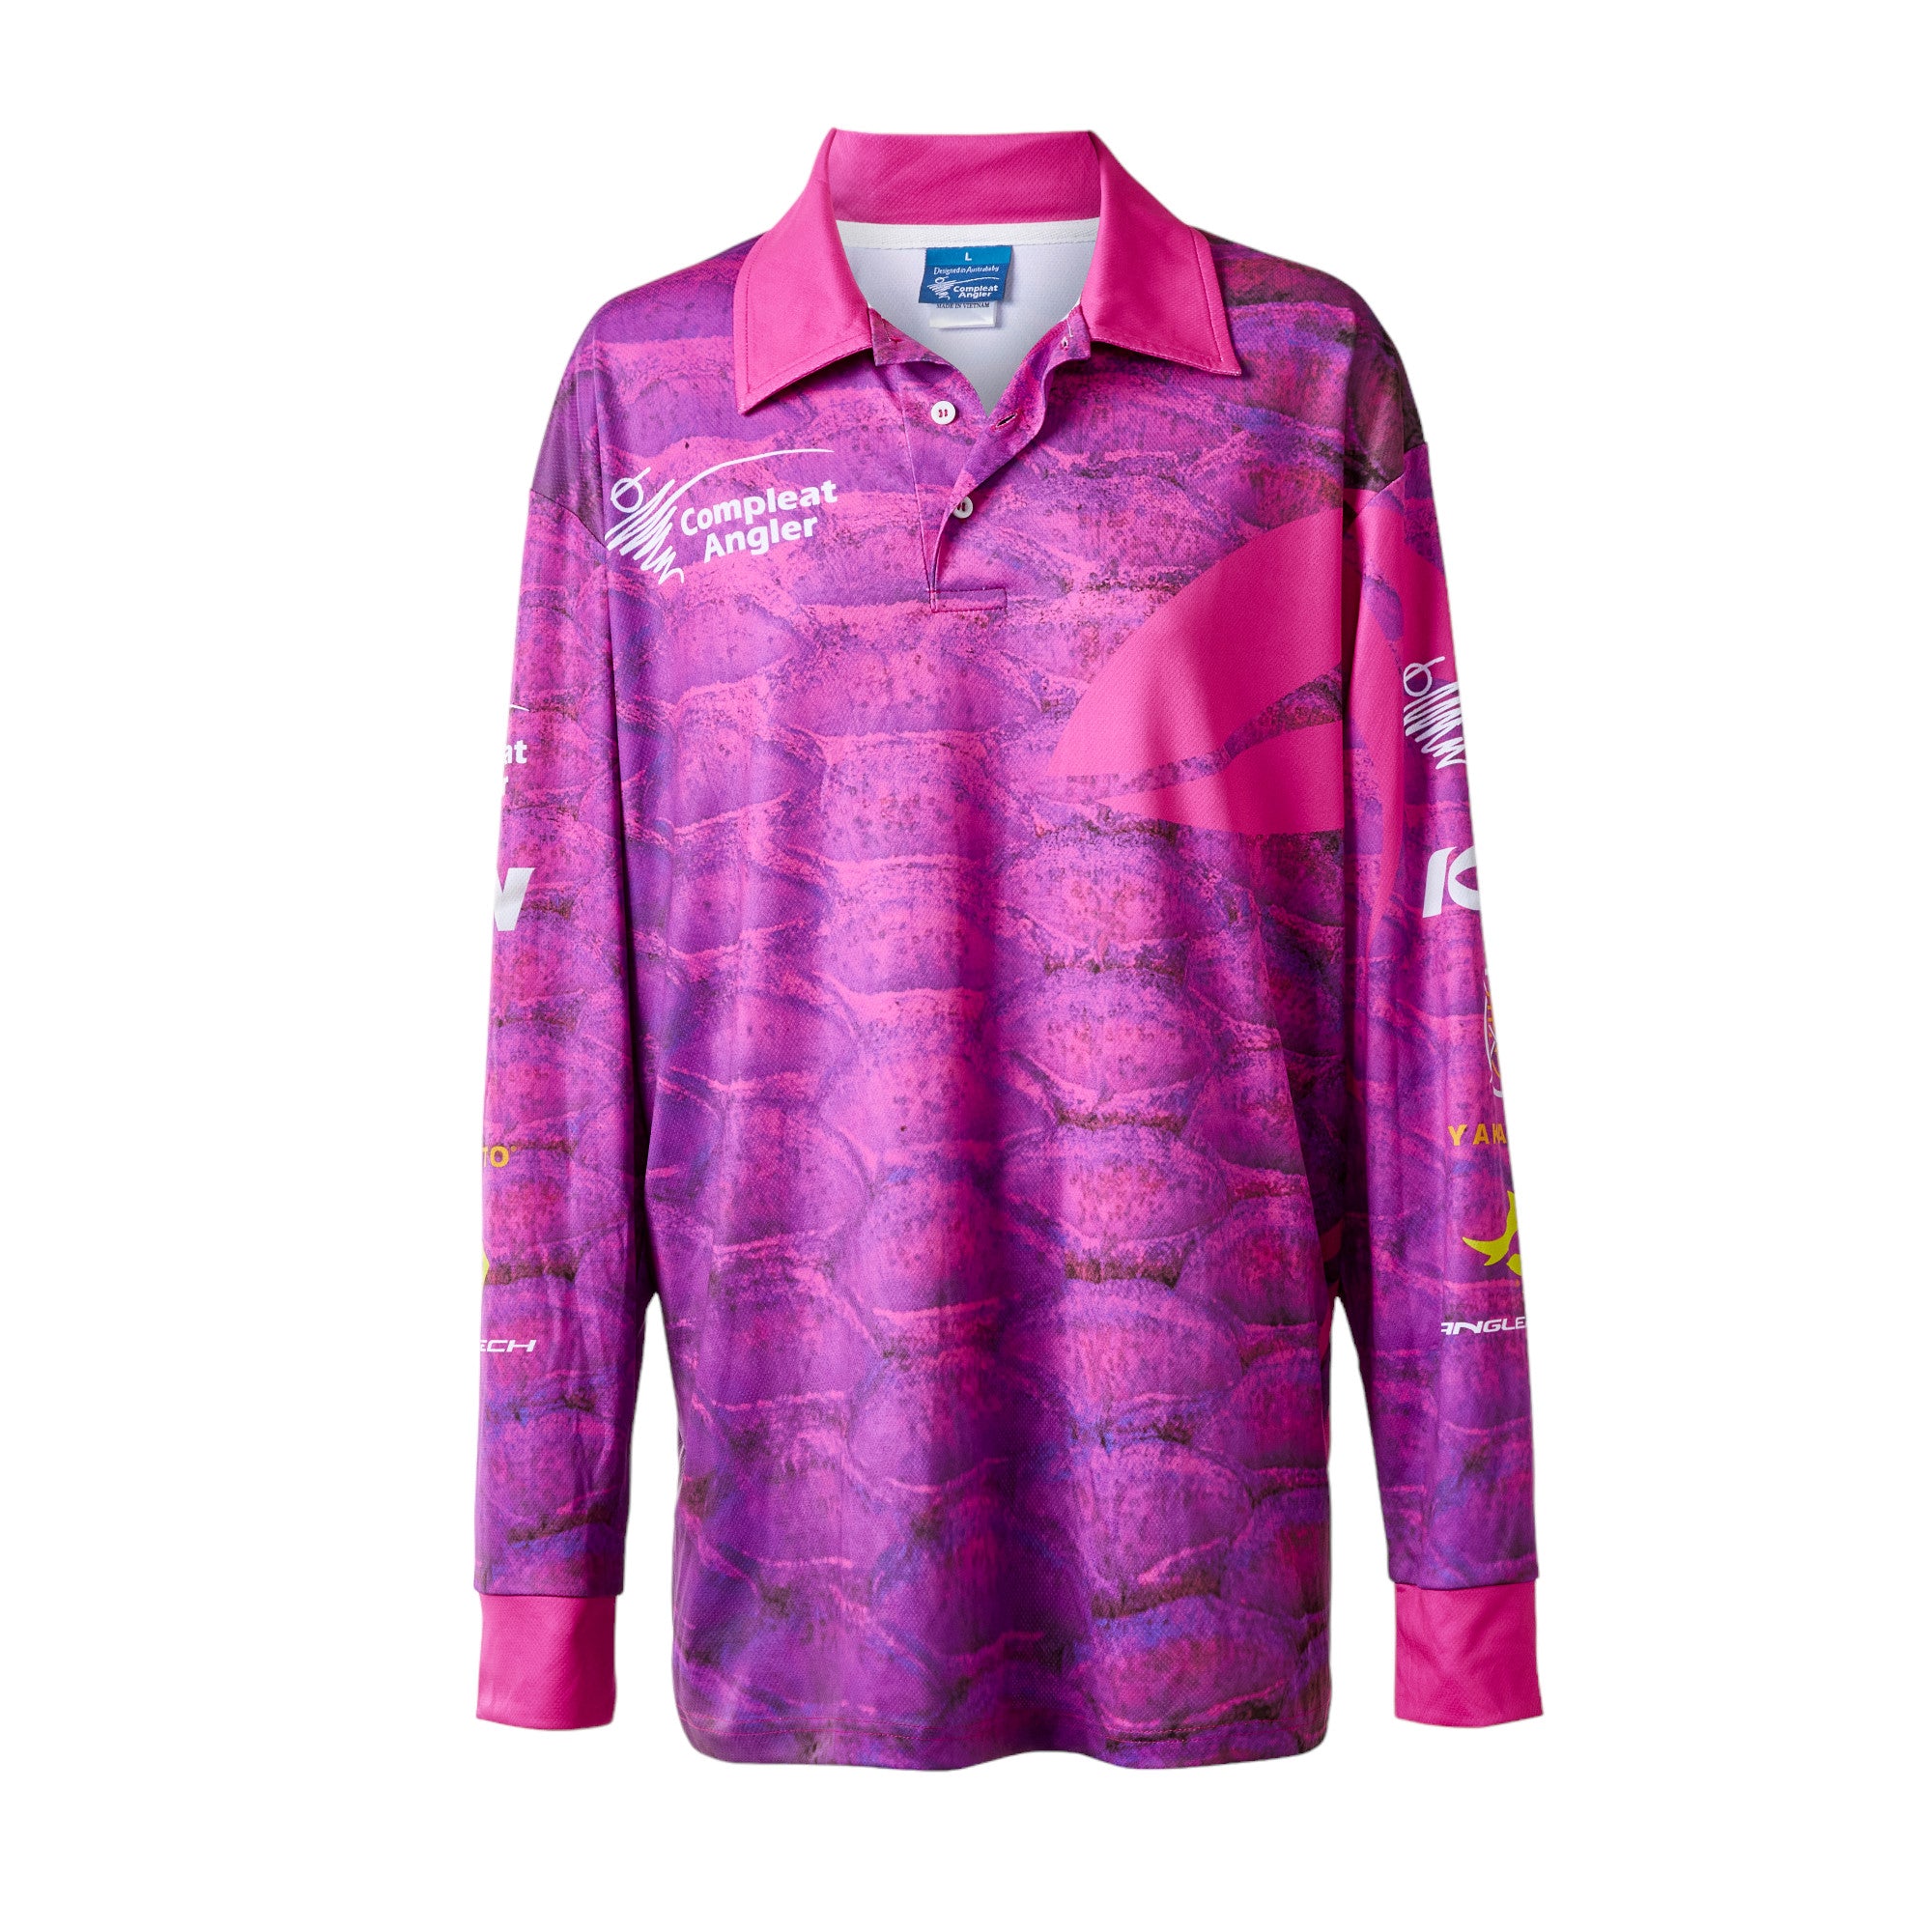 Compleat Angler Pink Scale Tournament Shirt